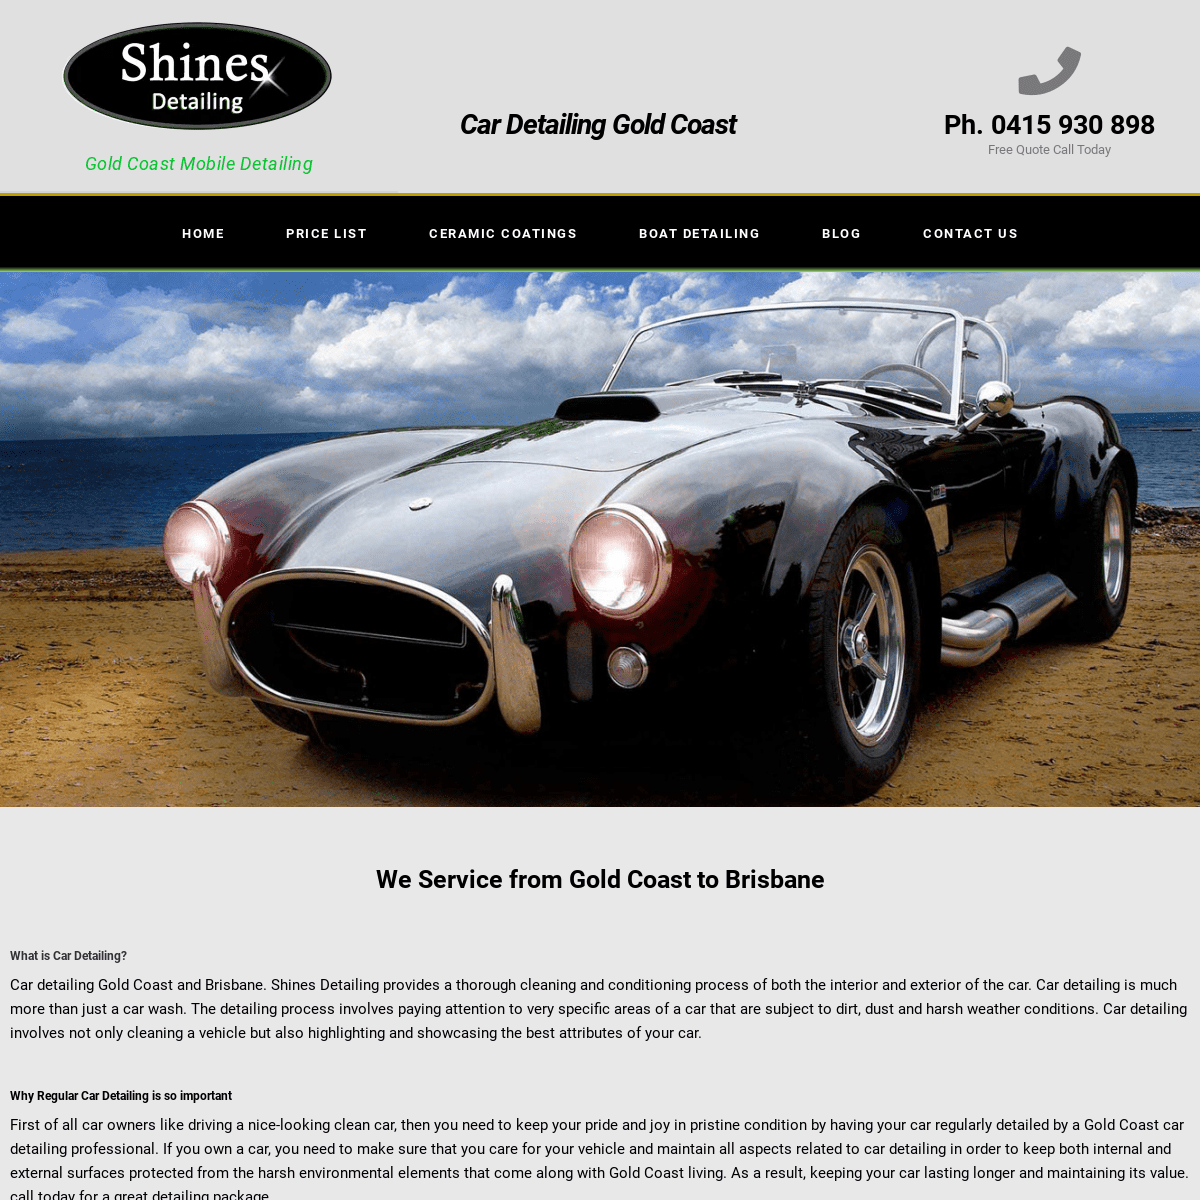 A complete backup of https://shinesdetailing.com.au